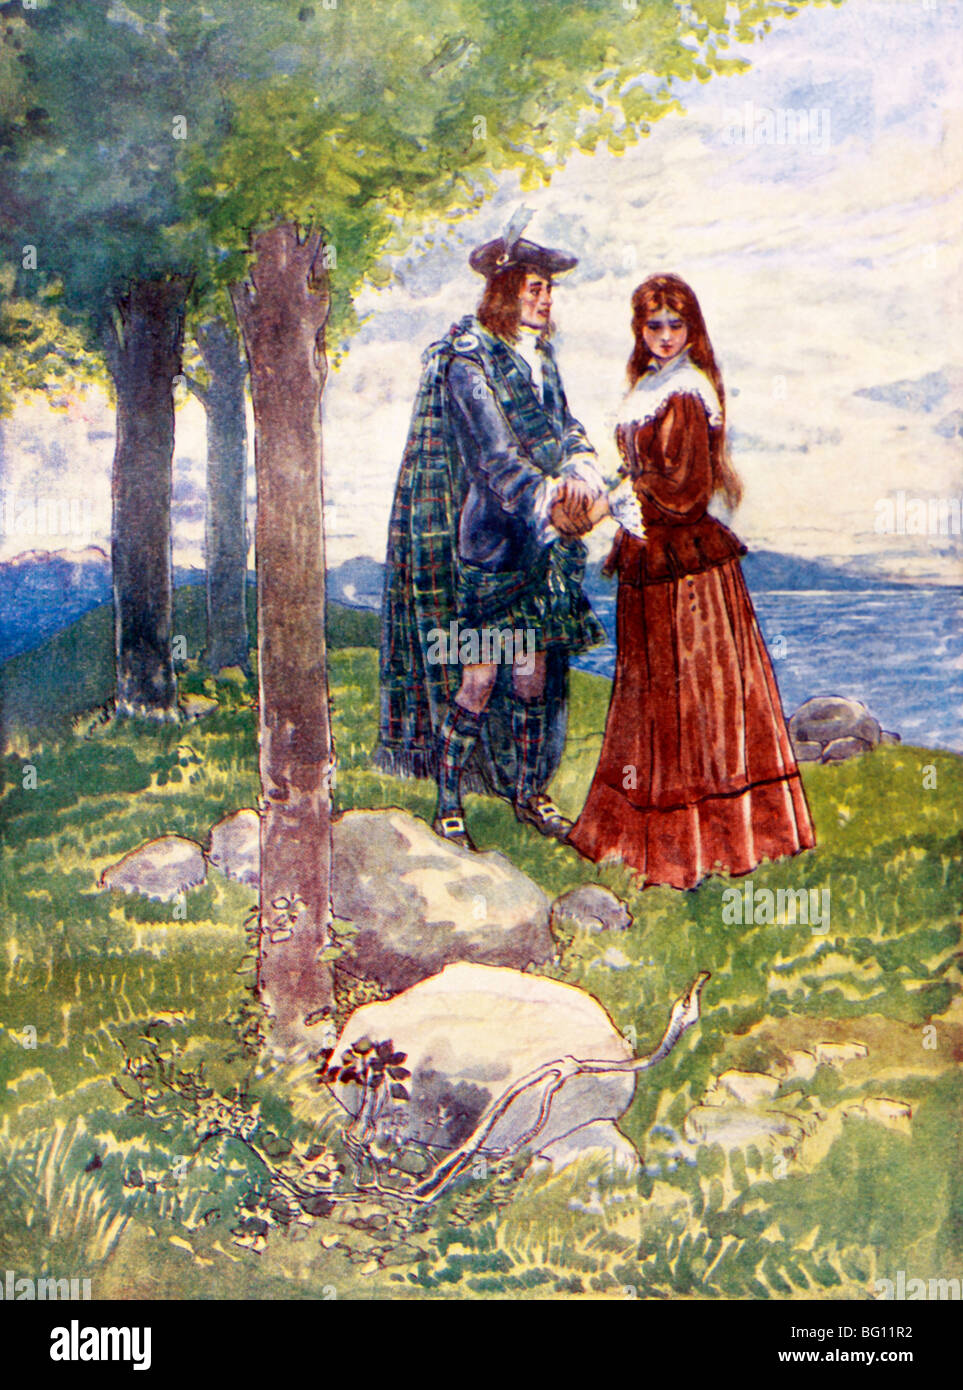 Illustration Of Prince Charles And Flora Macdonald Saying A Sad Farewell After Helping Him Escape To France Stock Photo